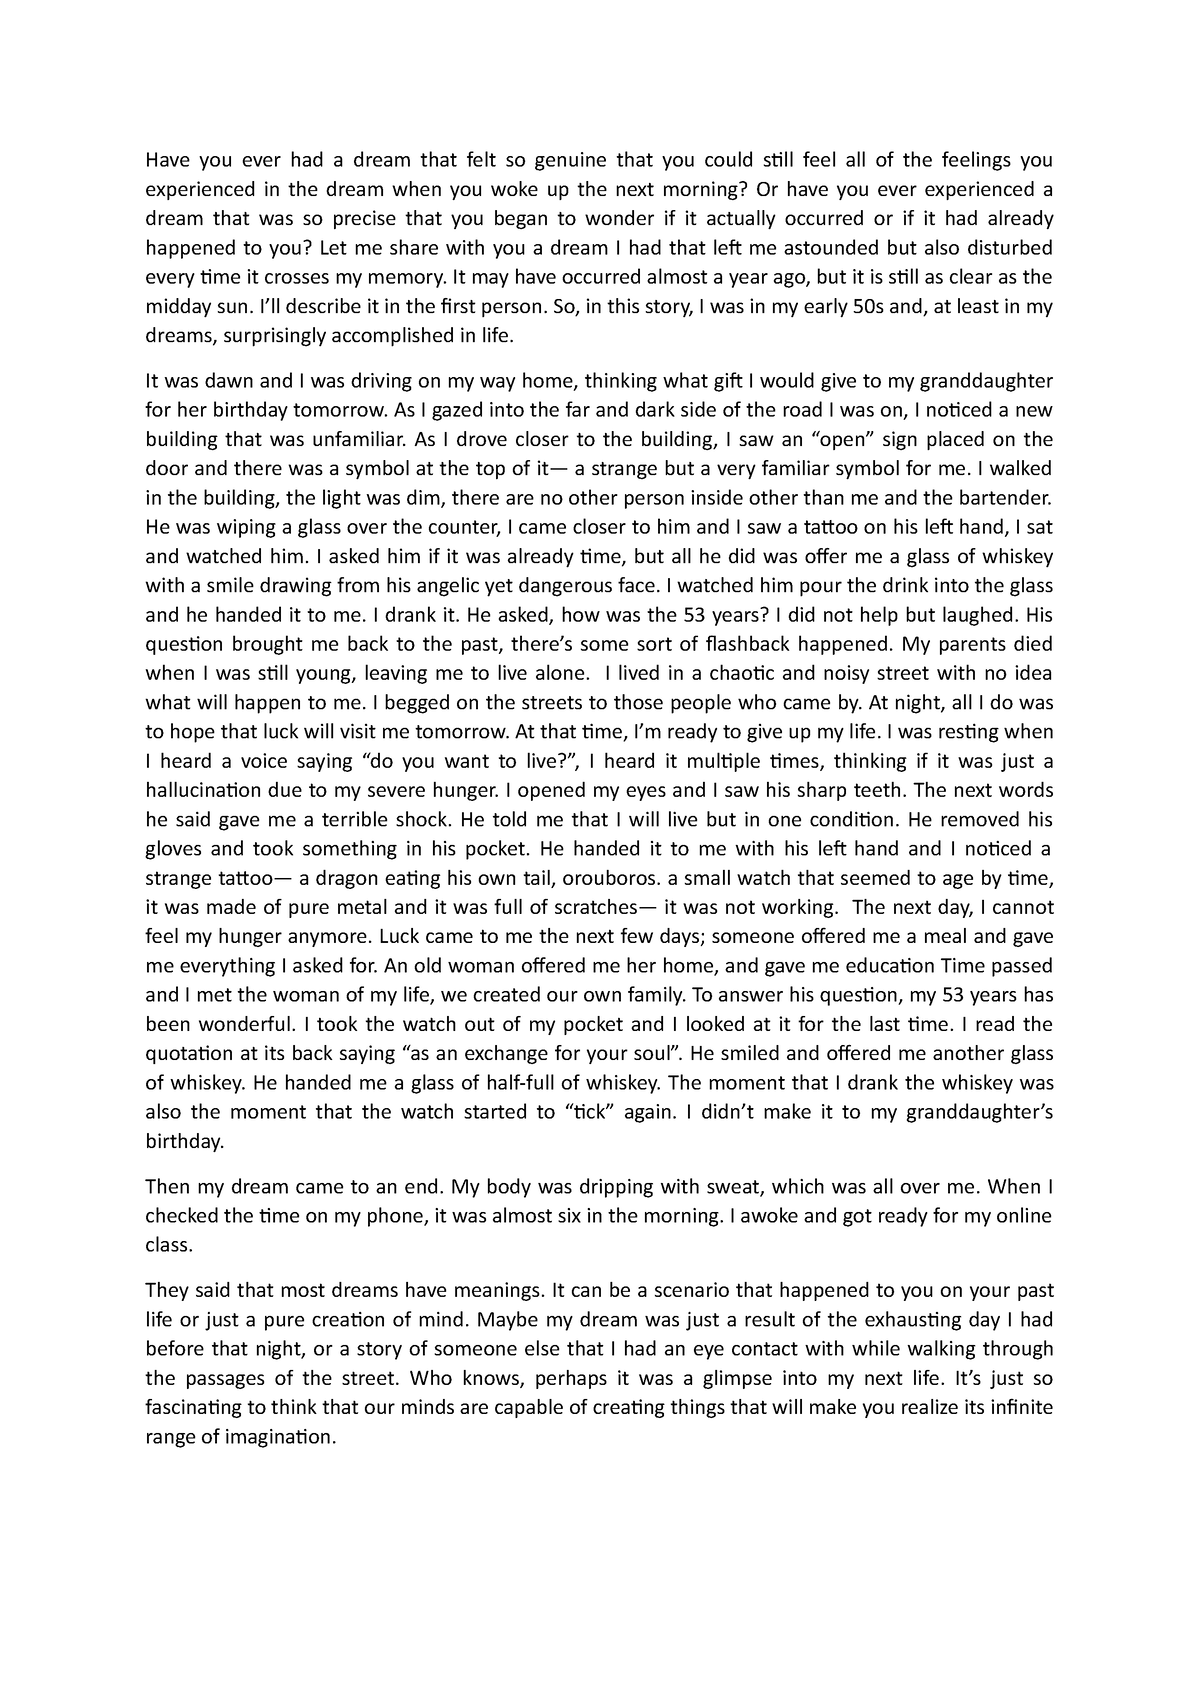 essay about dream